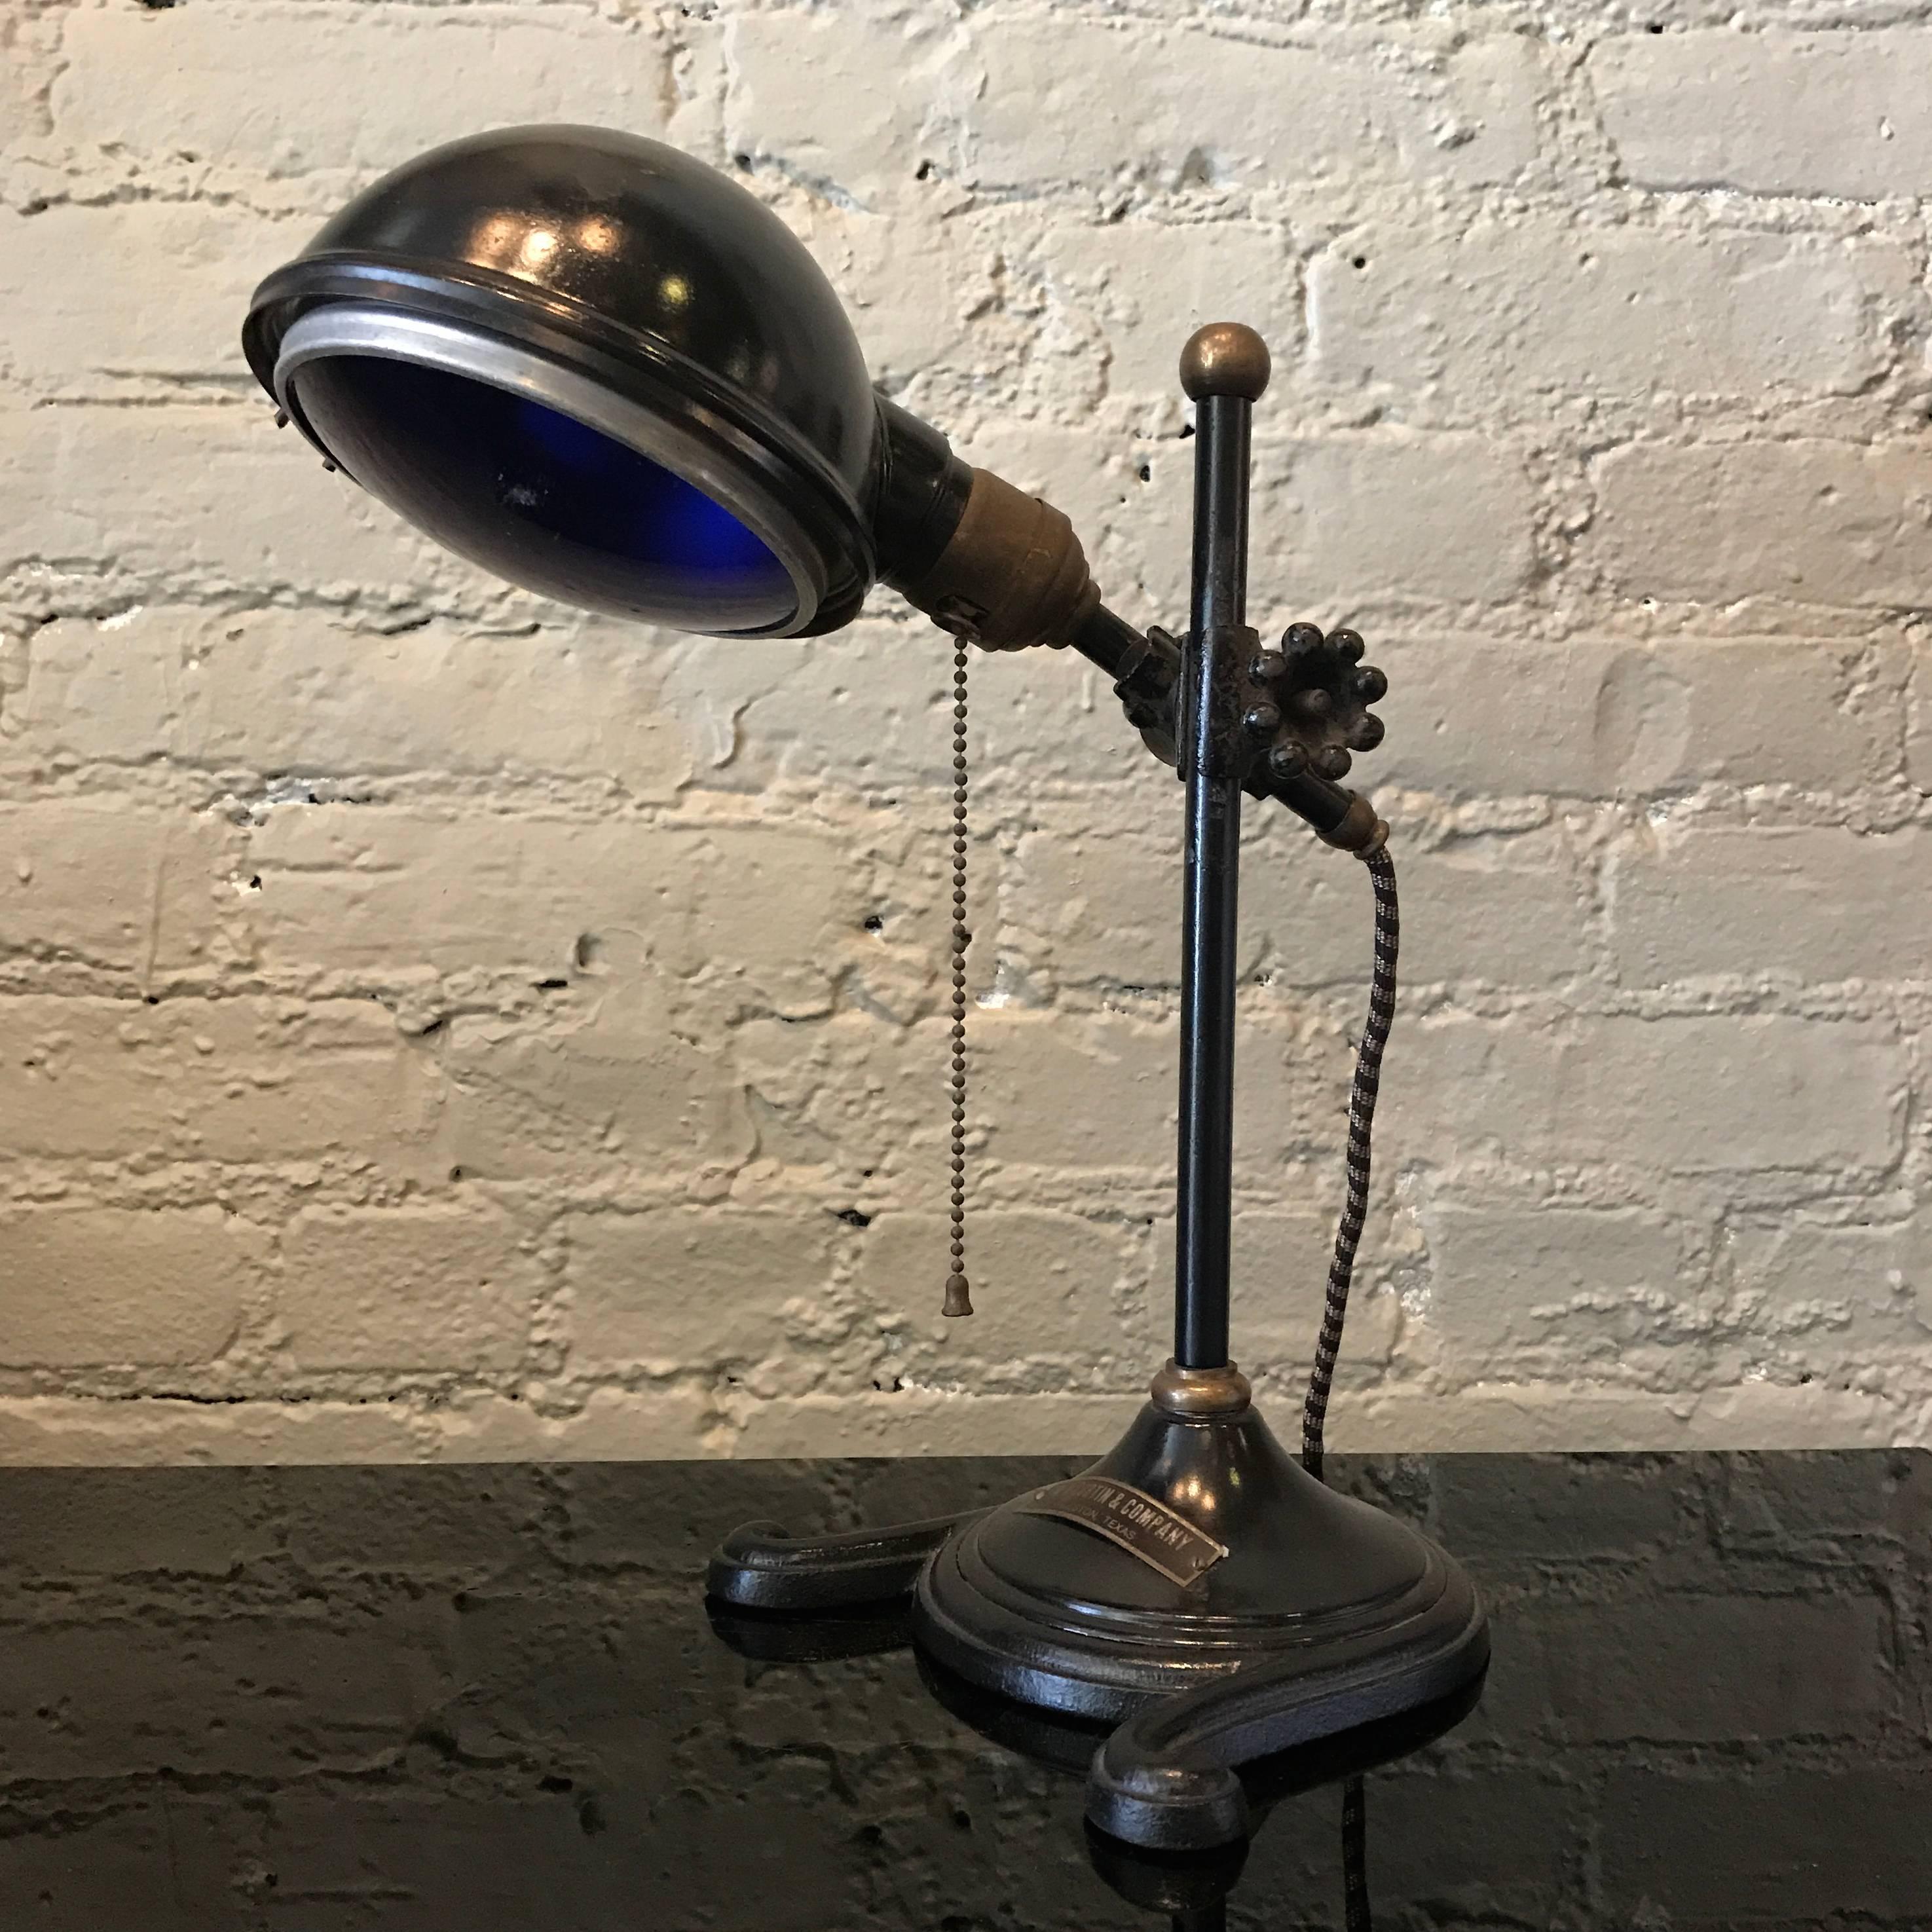 Industrial, early 20th century, cast metal and brass, laboratory, culturing lamp by W. H. Curtin and Company, Houston TX features a blue convex shade that casts a daylight hue. The lamp is articulating and height adjustable.